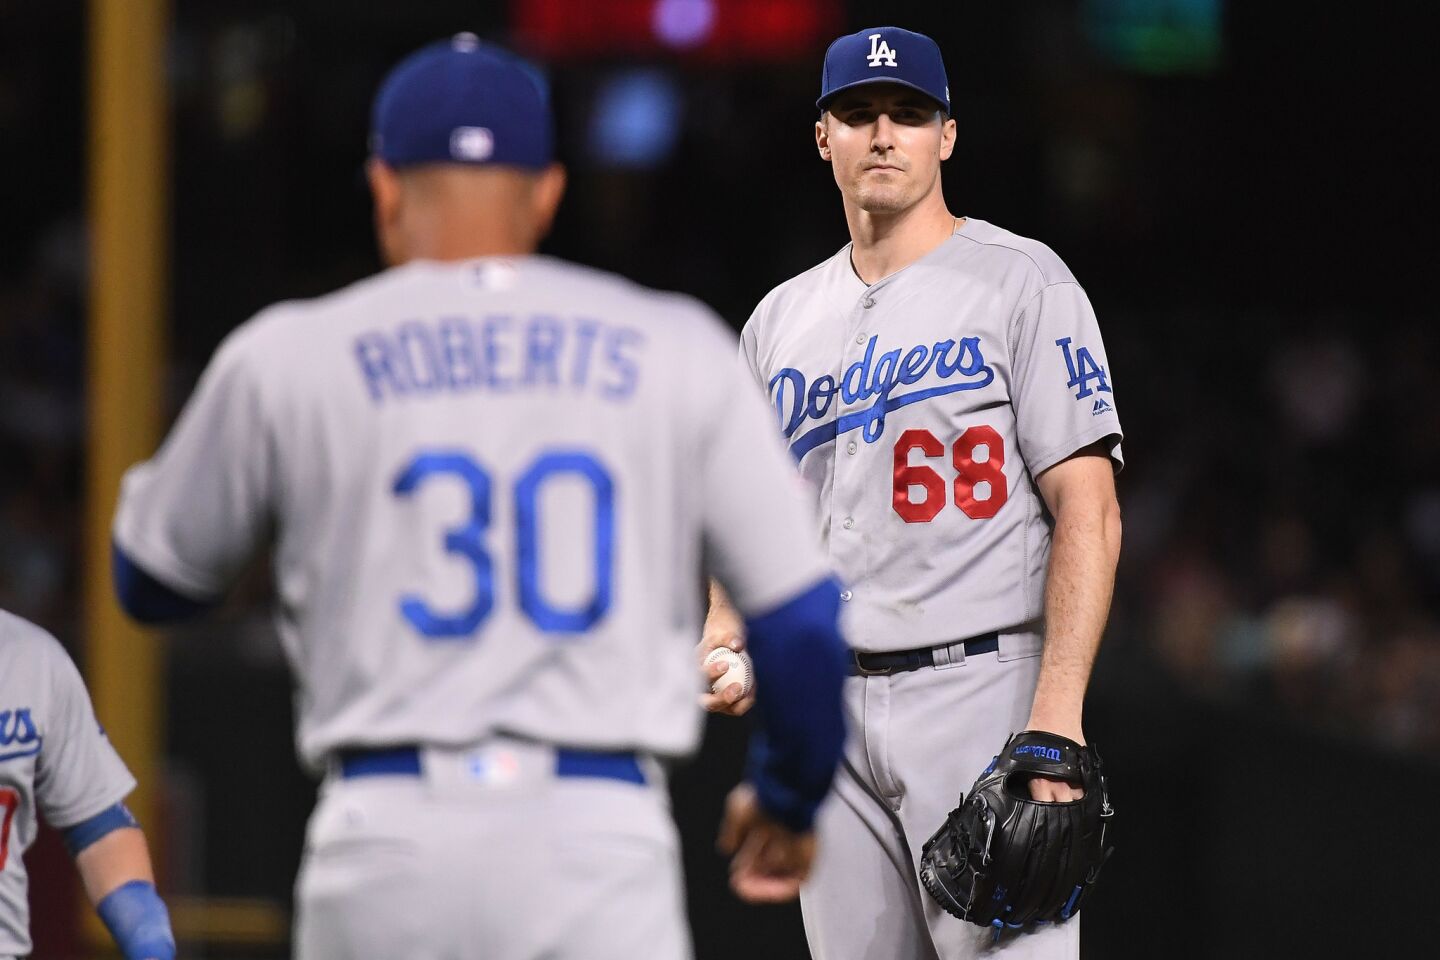 PHOENIX, AZ - SEPTEMBER 26: Ross Stripling #68 of the Los Angeles Dodgers reacts as manager Dave Roberts #30 approaches the mound to relieve him during the second inning of the MLB game against the Arizona Diamondbacks at Chase Field on September 26, 2018 in Phoenix, Arizona. (Photo by Jennifer Stewart/Getty Images) ** OUTS - ELSENT, FPG, CM - OUTS * NM, PH, VA if sourced by CT, LA or MoD **